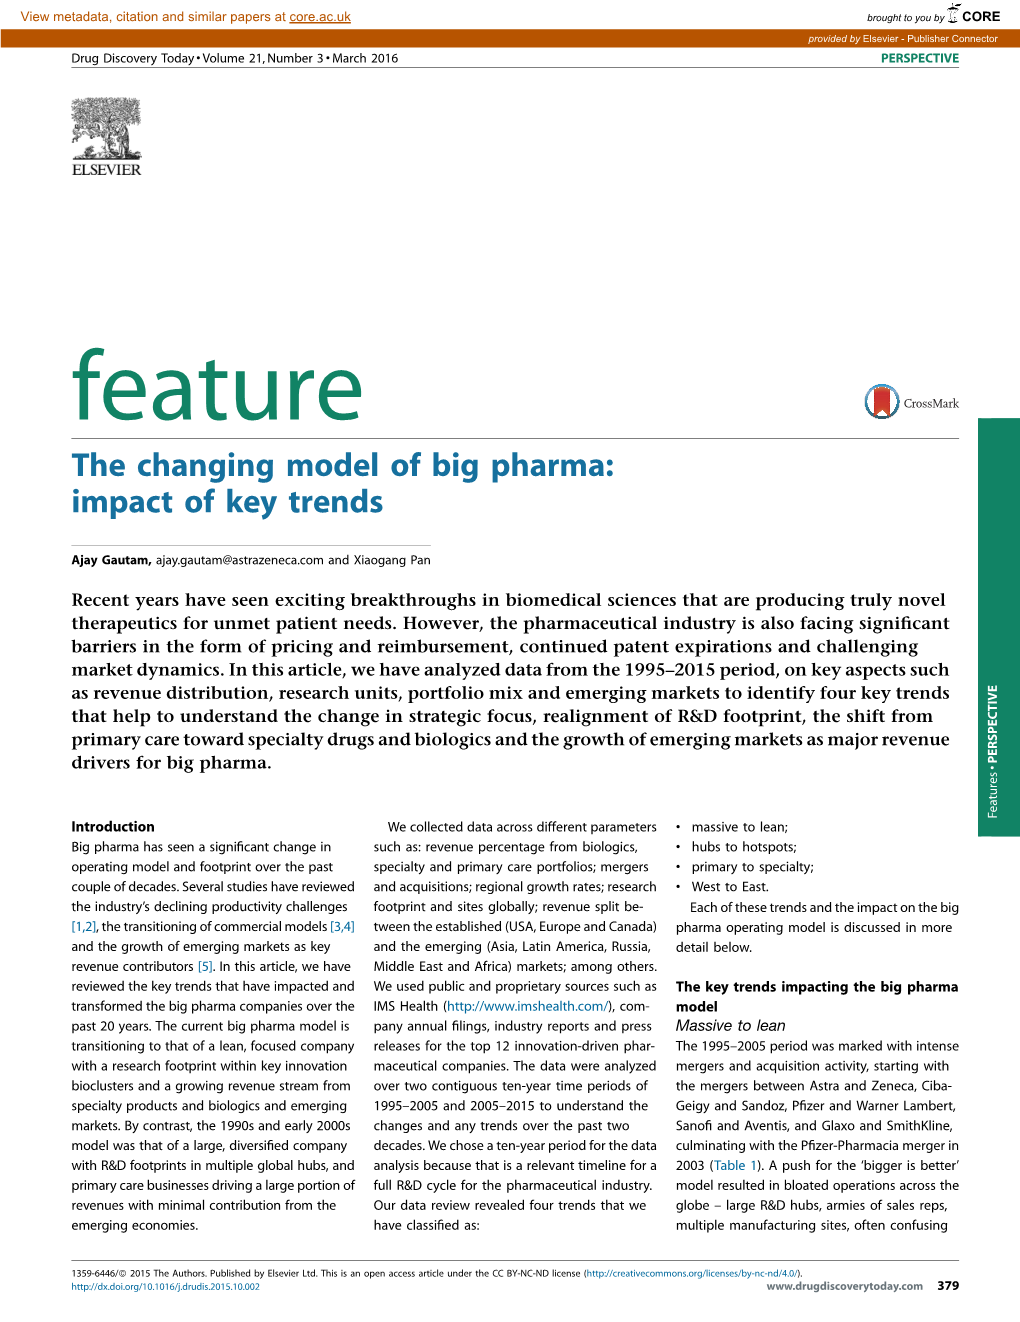 The Changing Model of Big Pharma: Impact of Key Trends